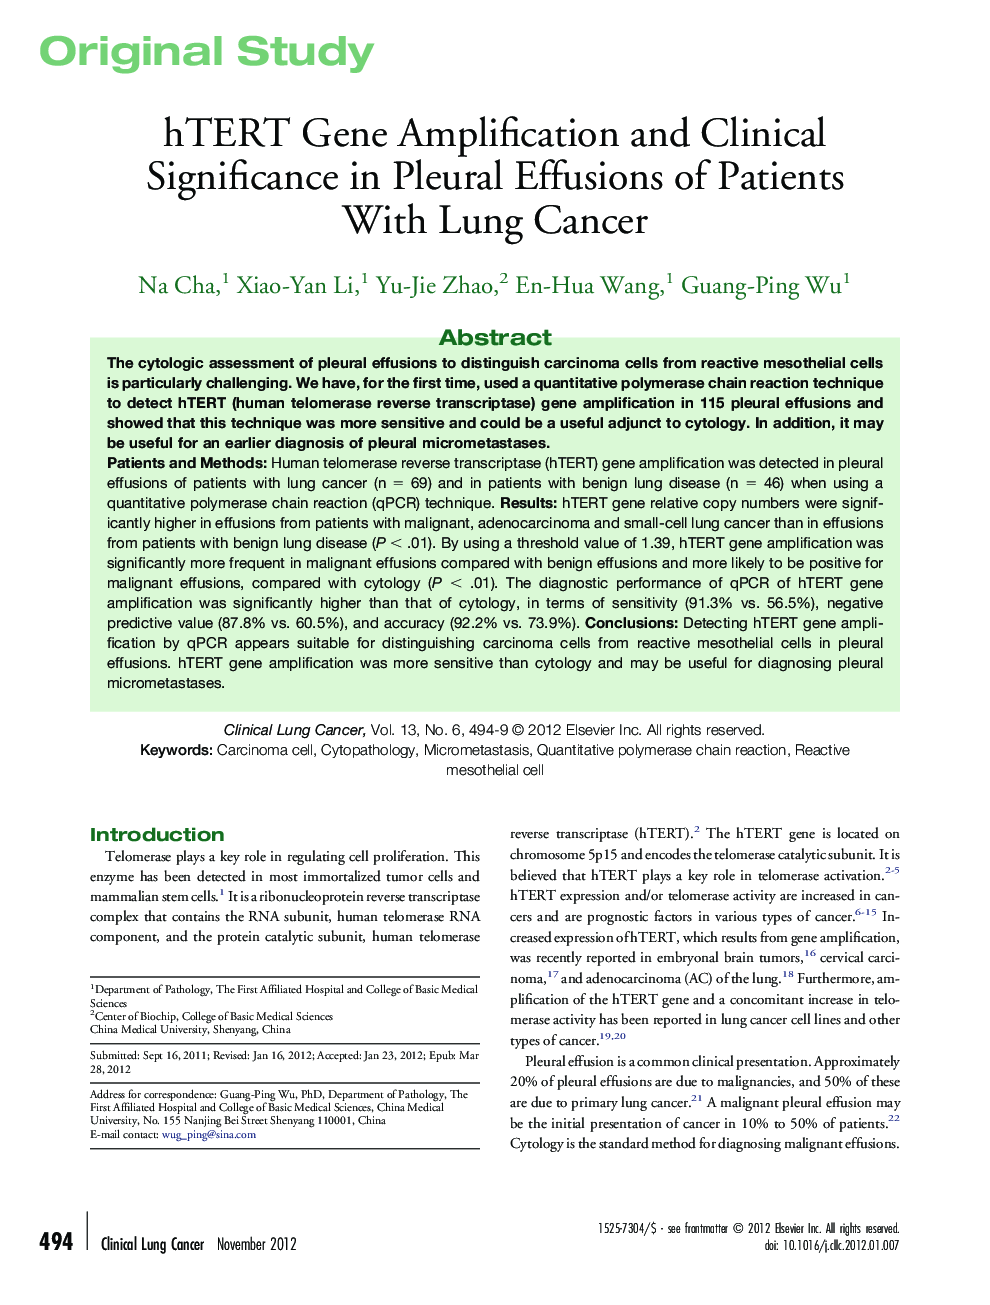 hTERT Gene Amplification and Clinical Significance in Pleural Effusions of Patients With Lung Cancer